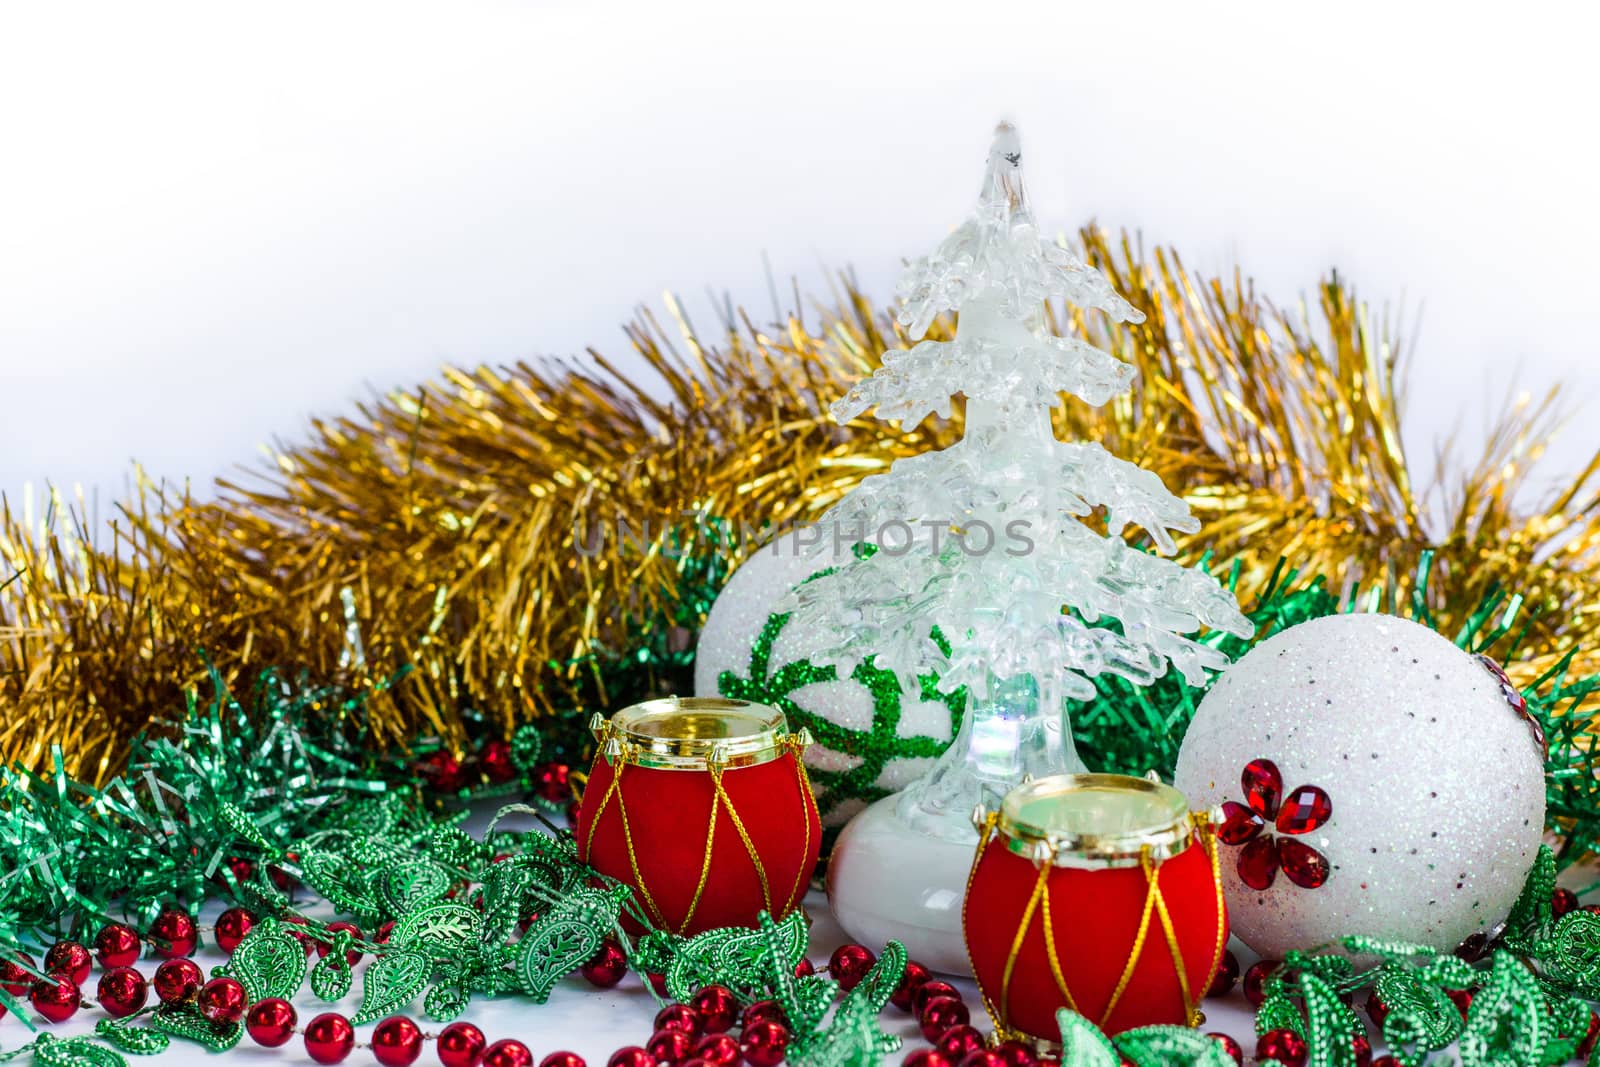 Christmas and New Year ornamenal decoration by VeraVerano